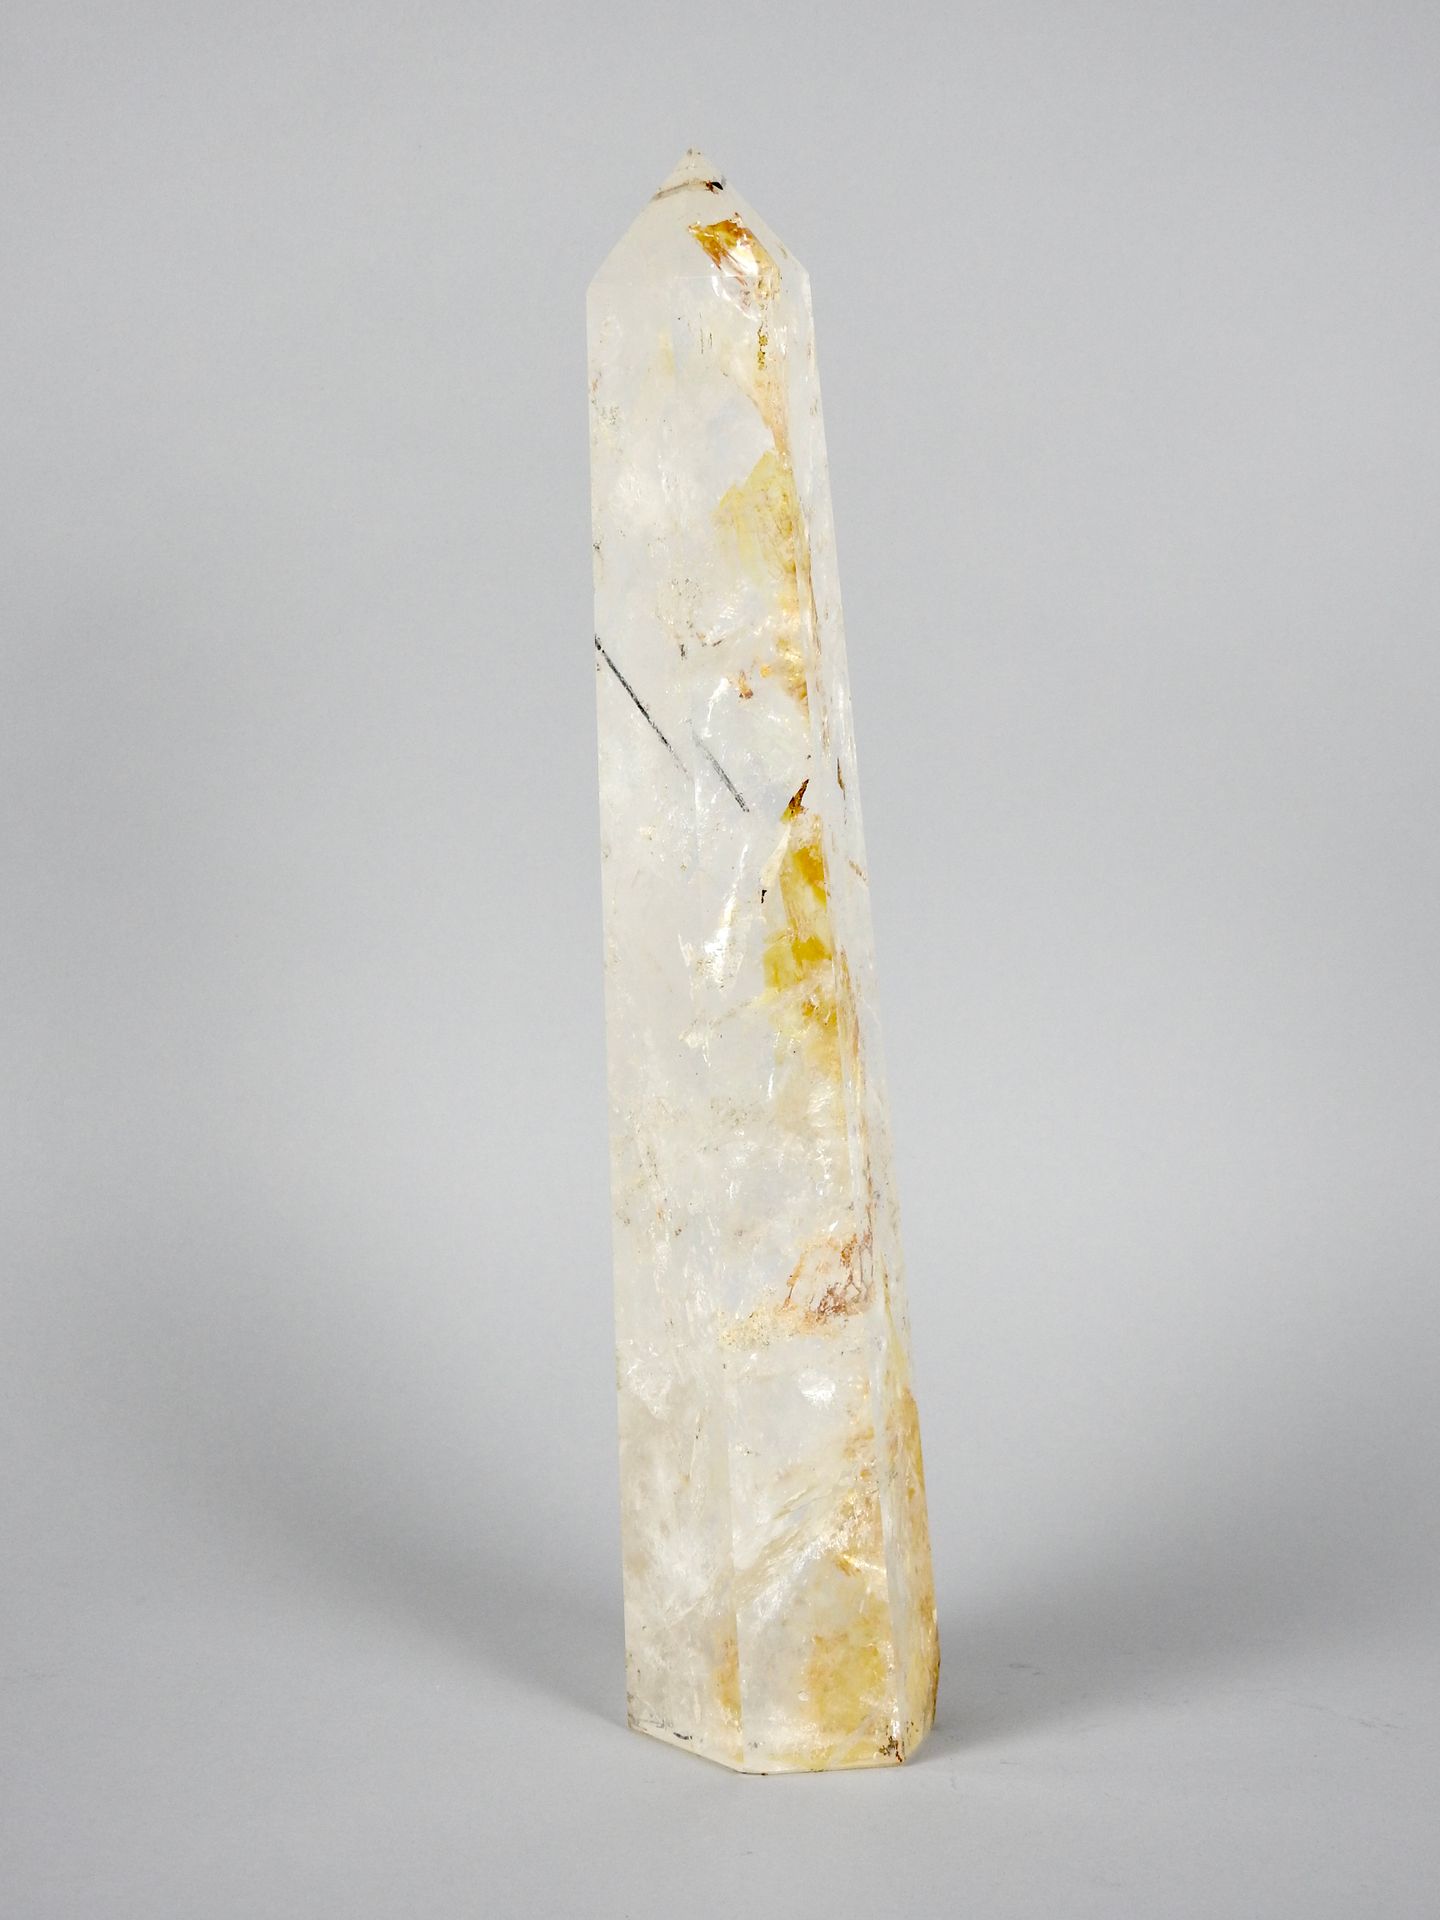 Null Polished and faceted monolith Rock crystal quartz

H 36 cm